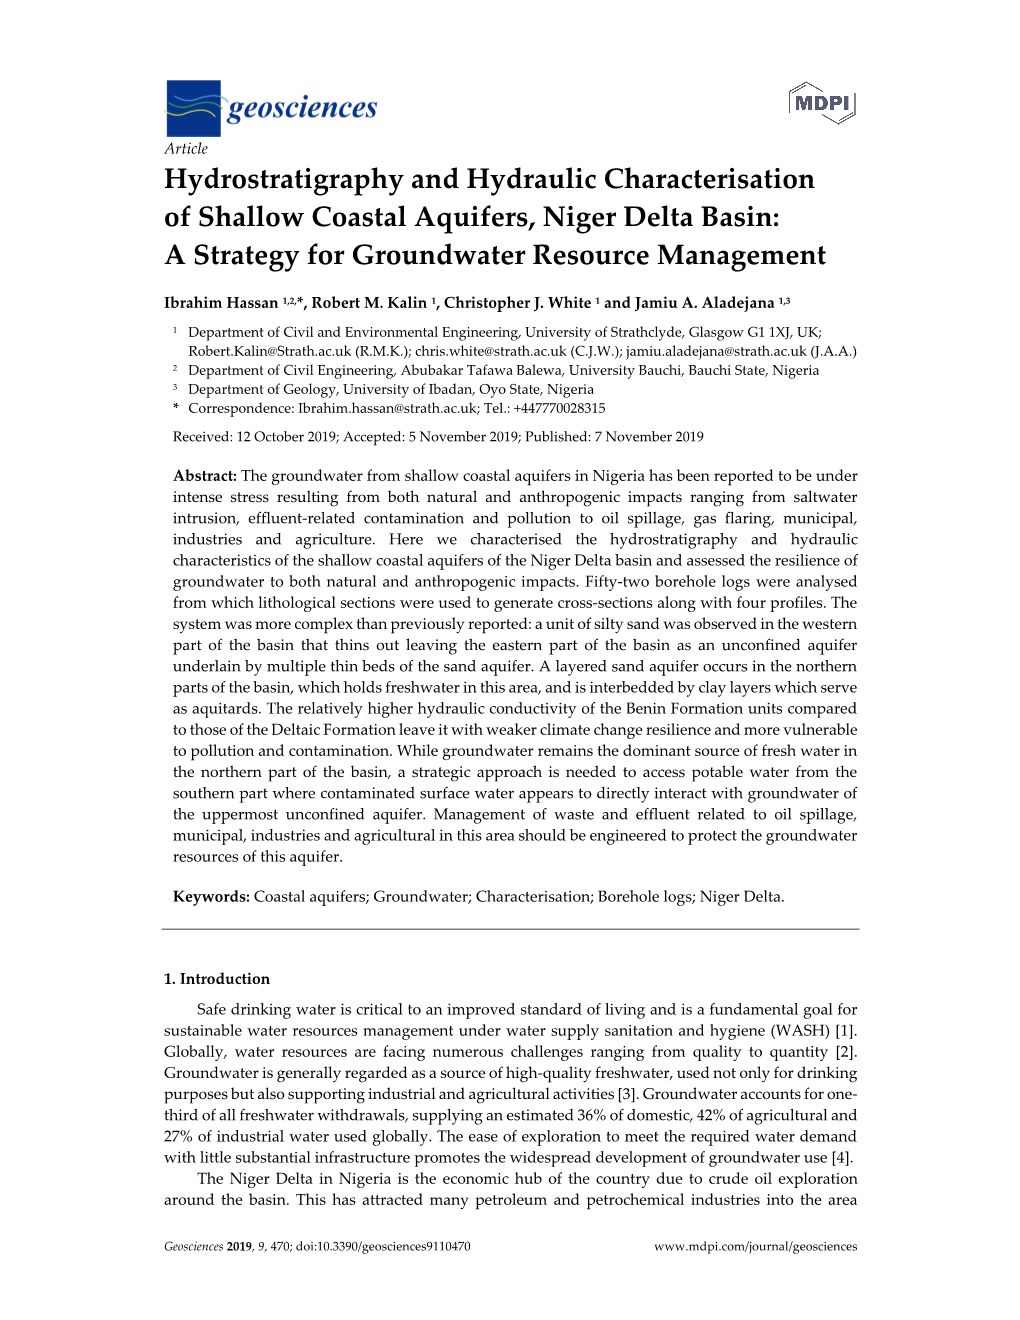 Hydrostratigraphy and Hydraulic Characterisation of Shallow Coastal Aquifers, Niger Delta Basin: a Strategy for Groundwater Resource Management